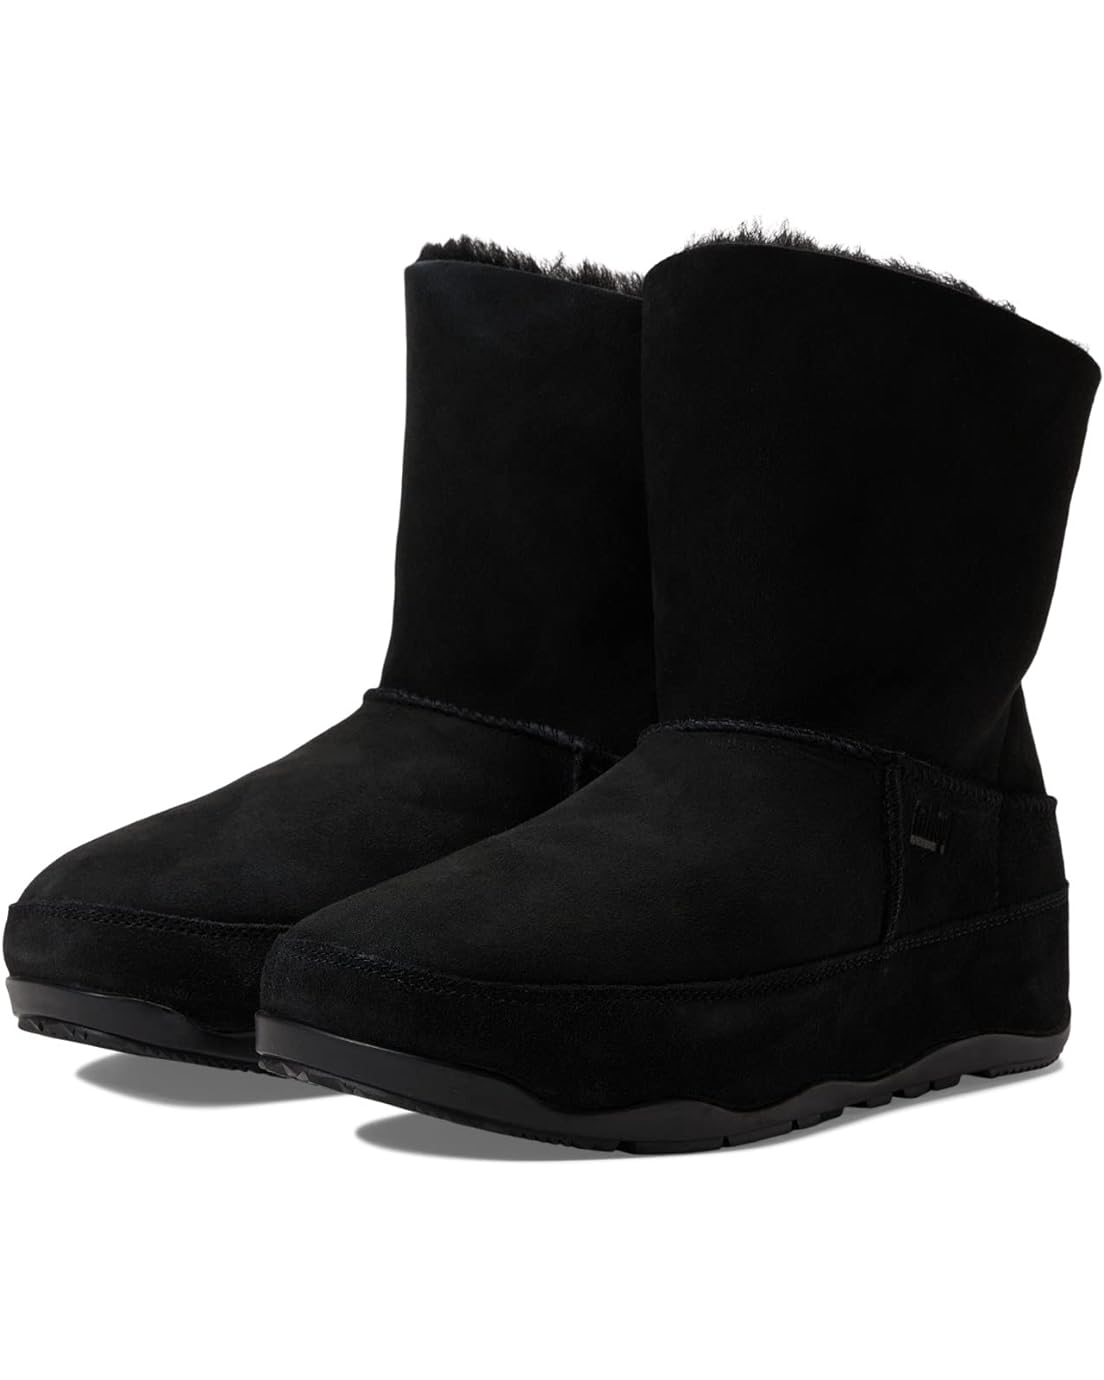 FitFlop Original Mukluk Shorty Double-Face Shearling Boots